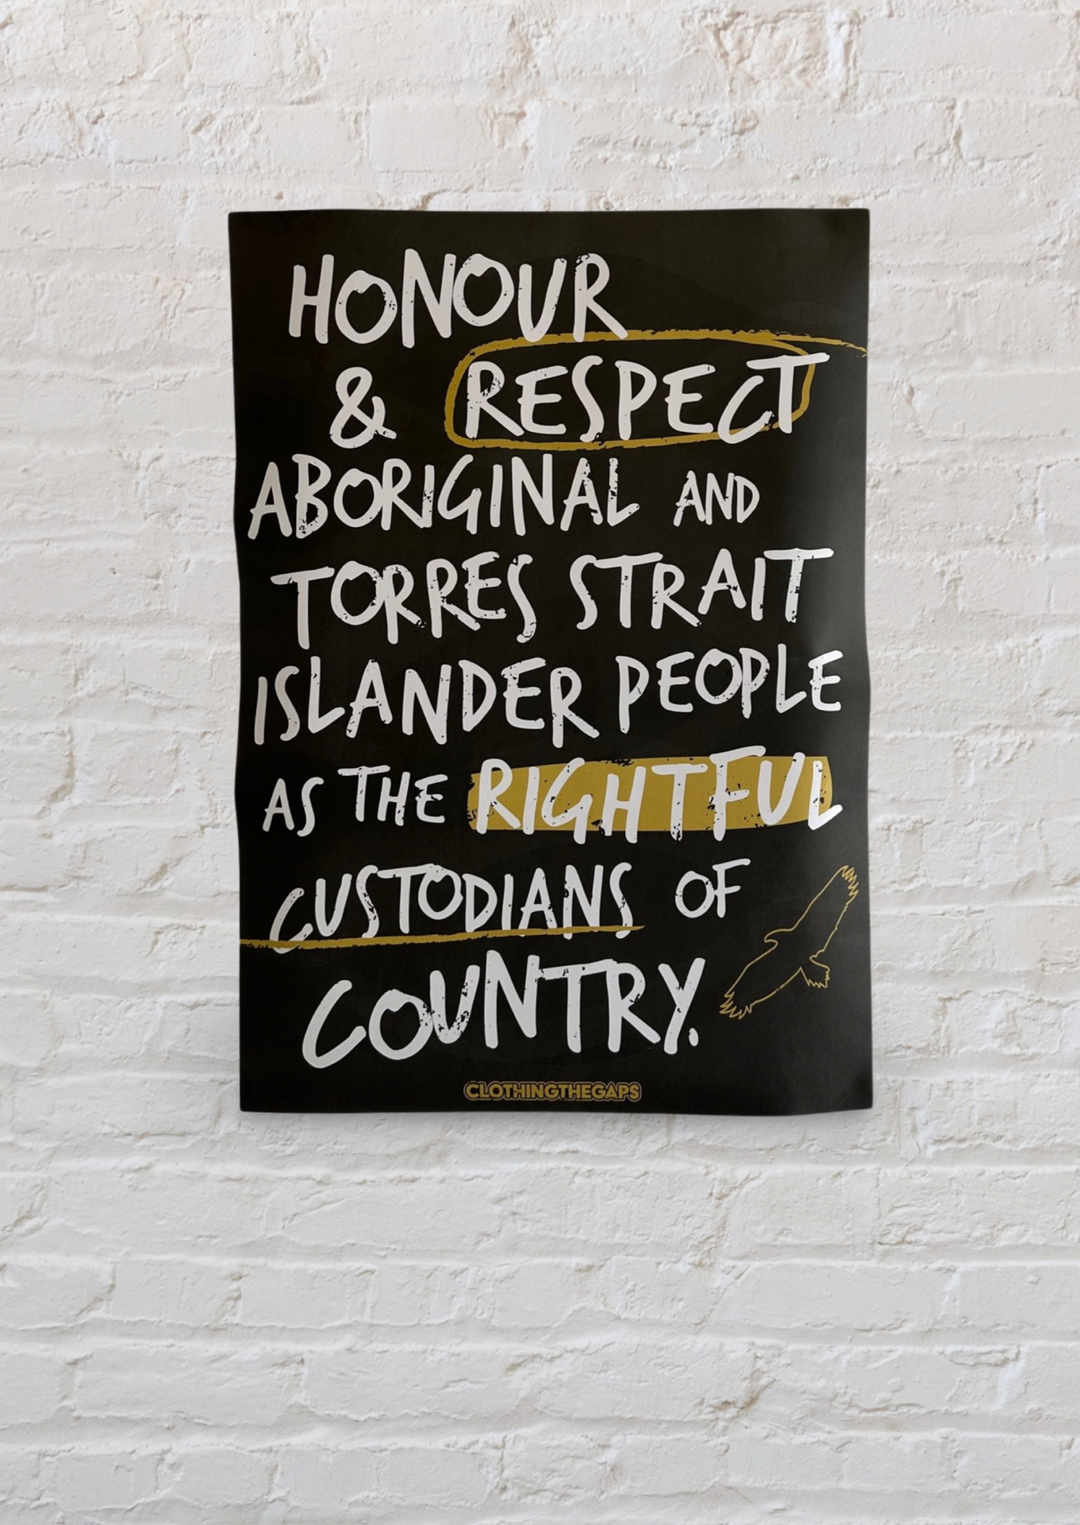 Clothing The Gaps. Handwritten Honour Country Posters. Black background poster with white hand-writen style text 'Honour and respect Aboriginal and Torres Strait Islander people as the rightful custodians of country.' Circling 'respect' underlining 'custodians' and highlighting 'rightful' in a sand yellow colour. Outlined 'bunjil' eagle in bottom right corner'